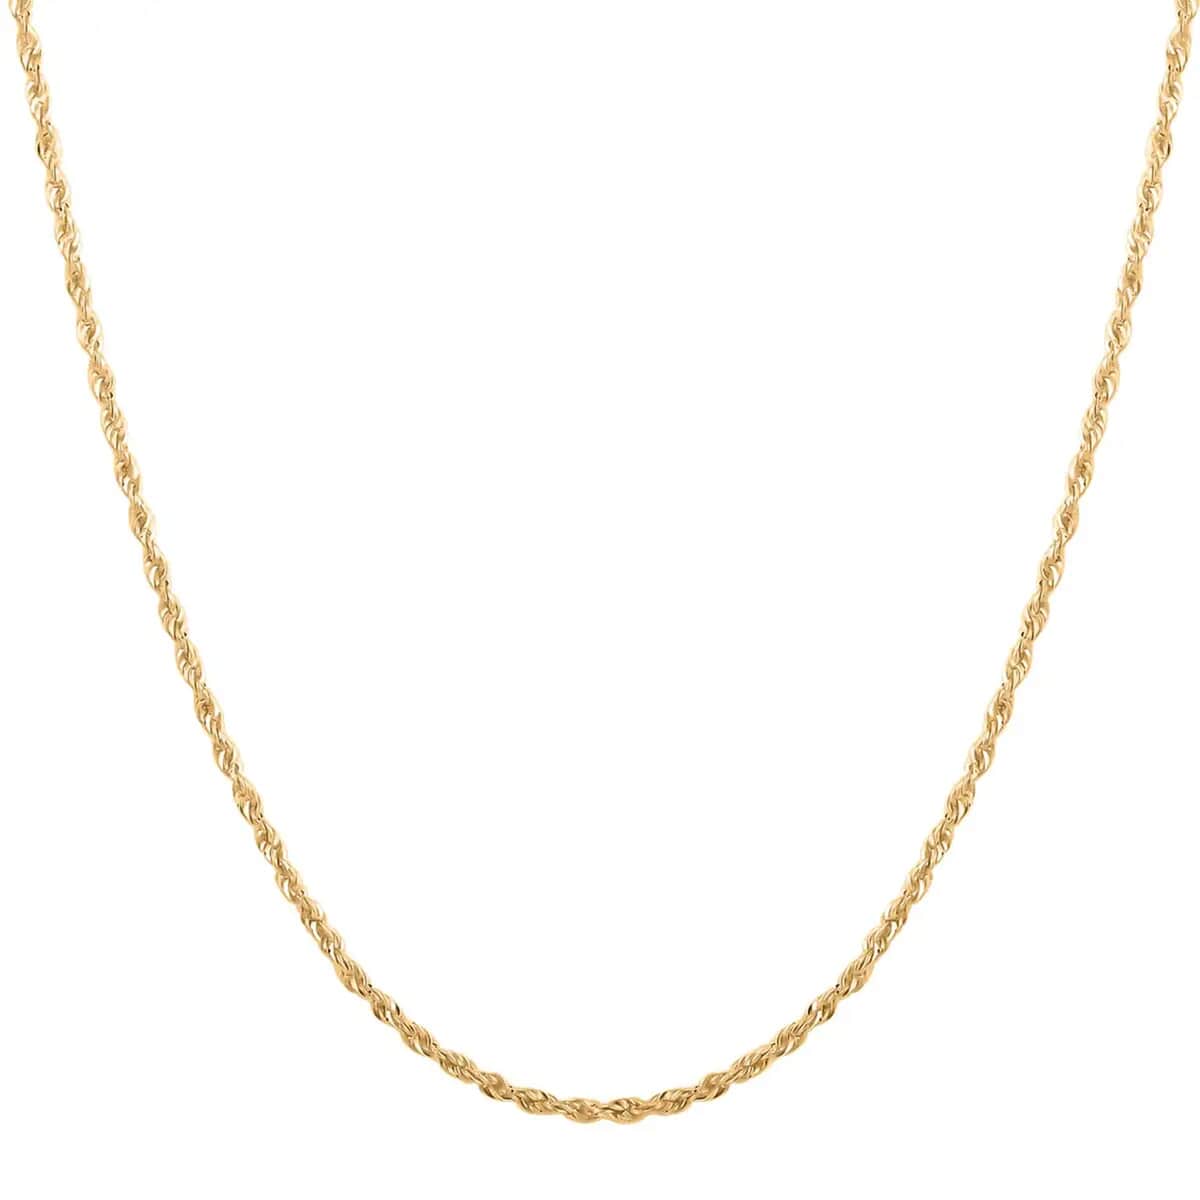 10K Yellow Gold Set of 2 Rope Chain Necklace, Rope Necklaces, Rope Chains, Gold Chain, Gold Necklace, 18 Inch Chain Necklace 1.5mm 2.60 Grams image number 0